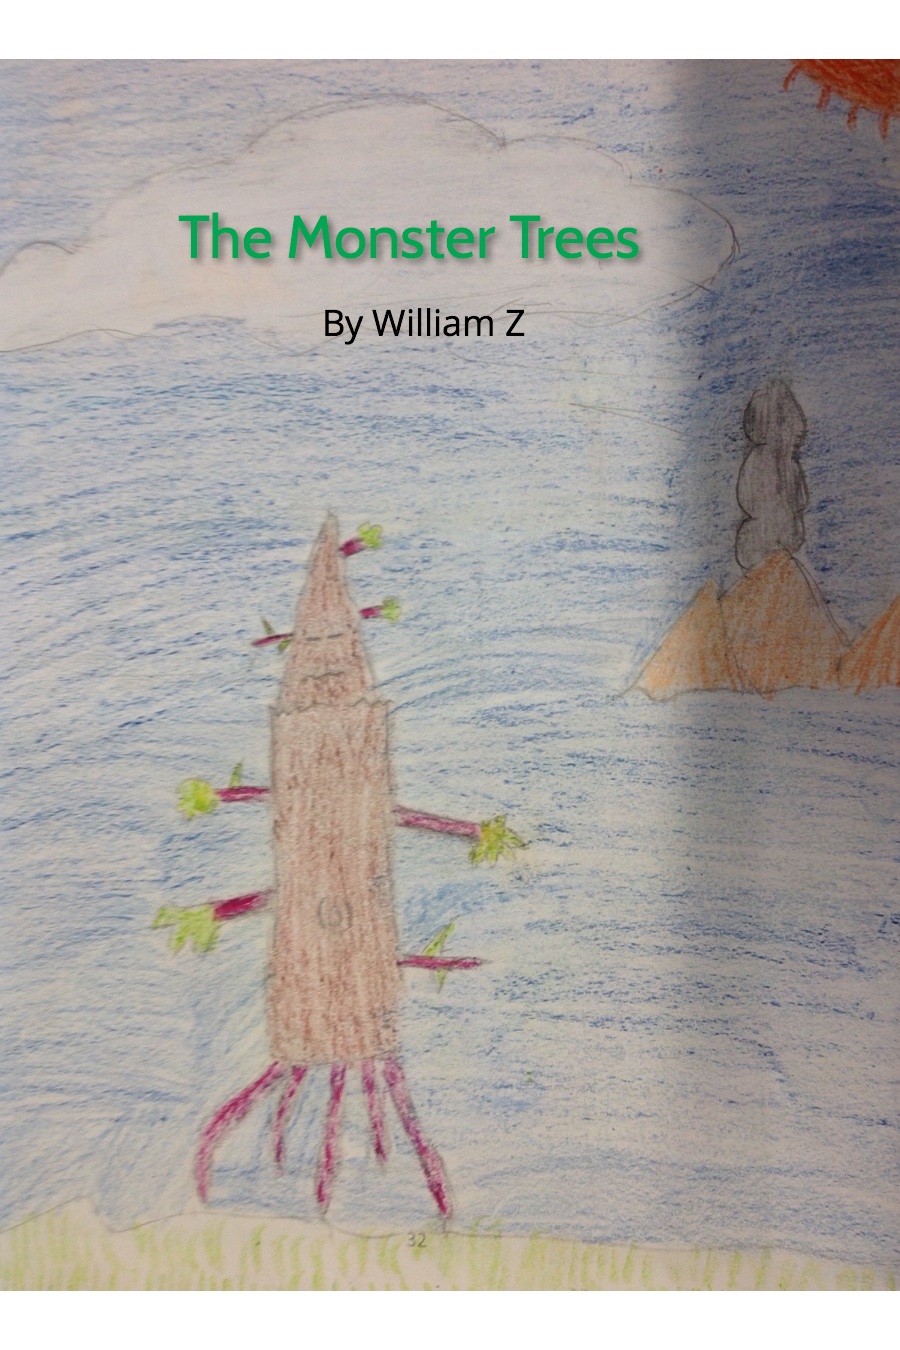 The Monster Trees by William Z